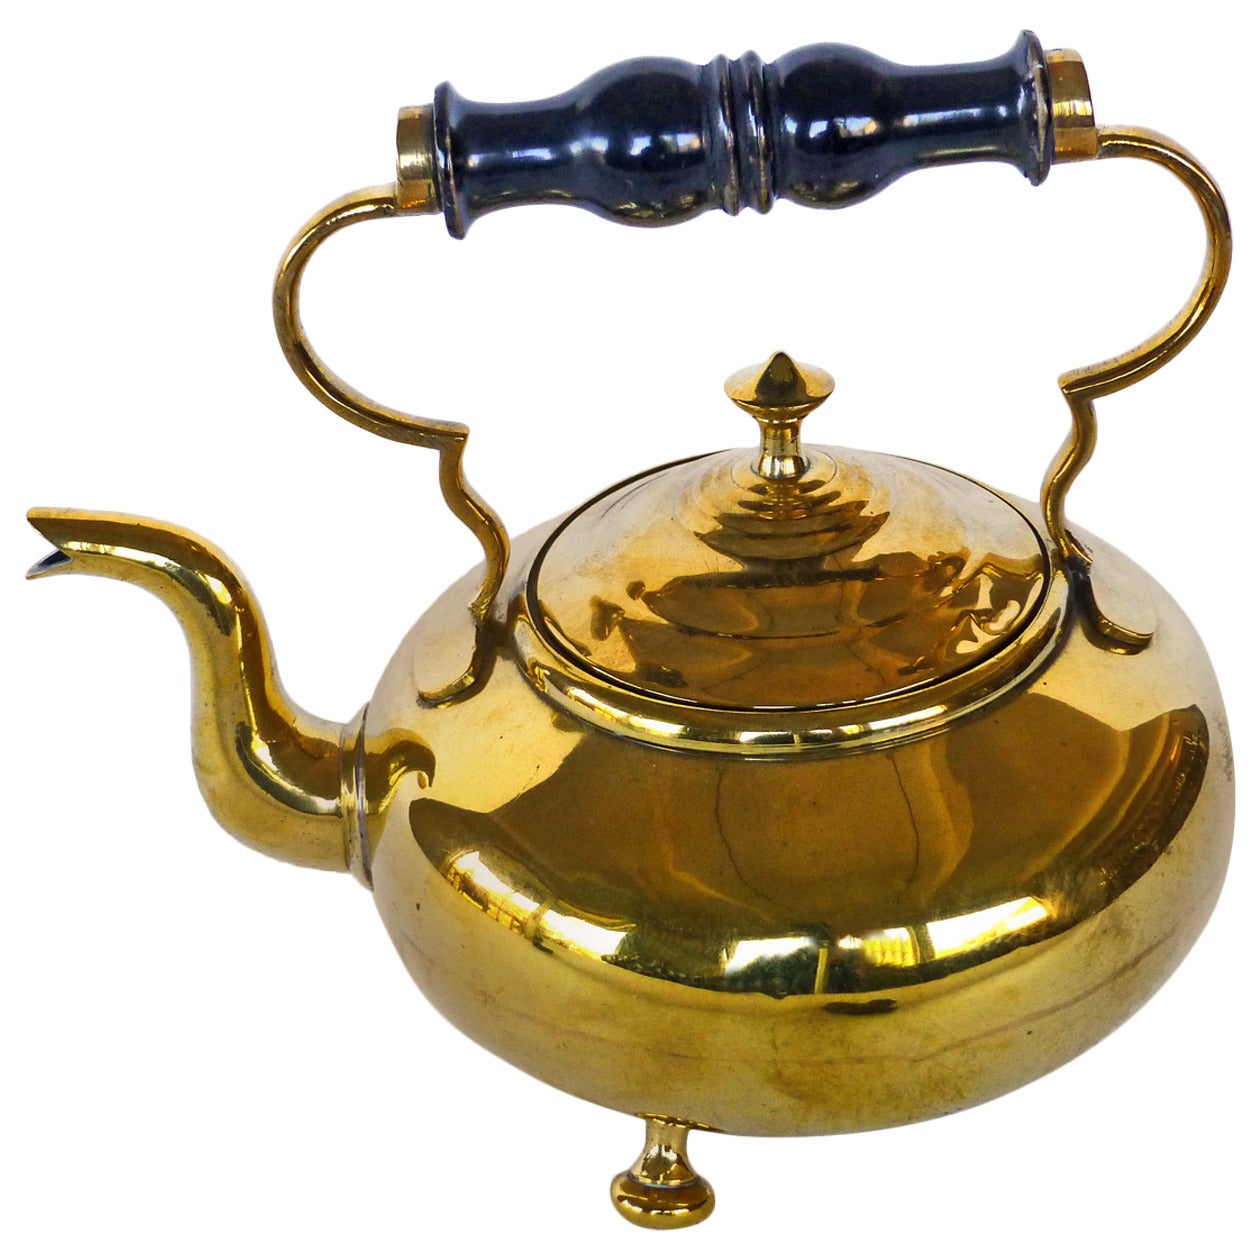 Vintage Brass Miniature Kettle Decorative Ornament two-piece with adjustable handle